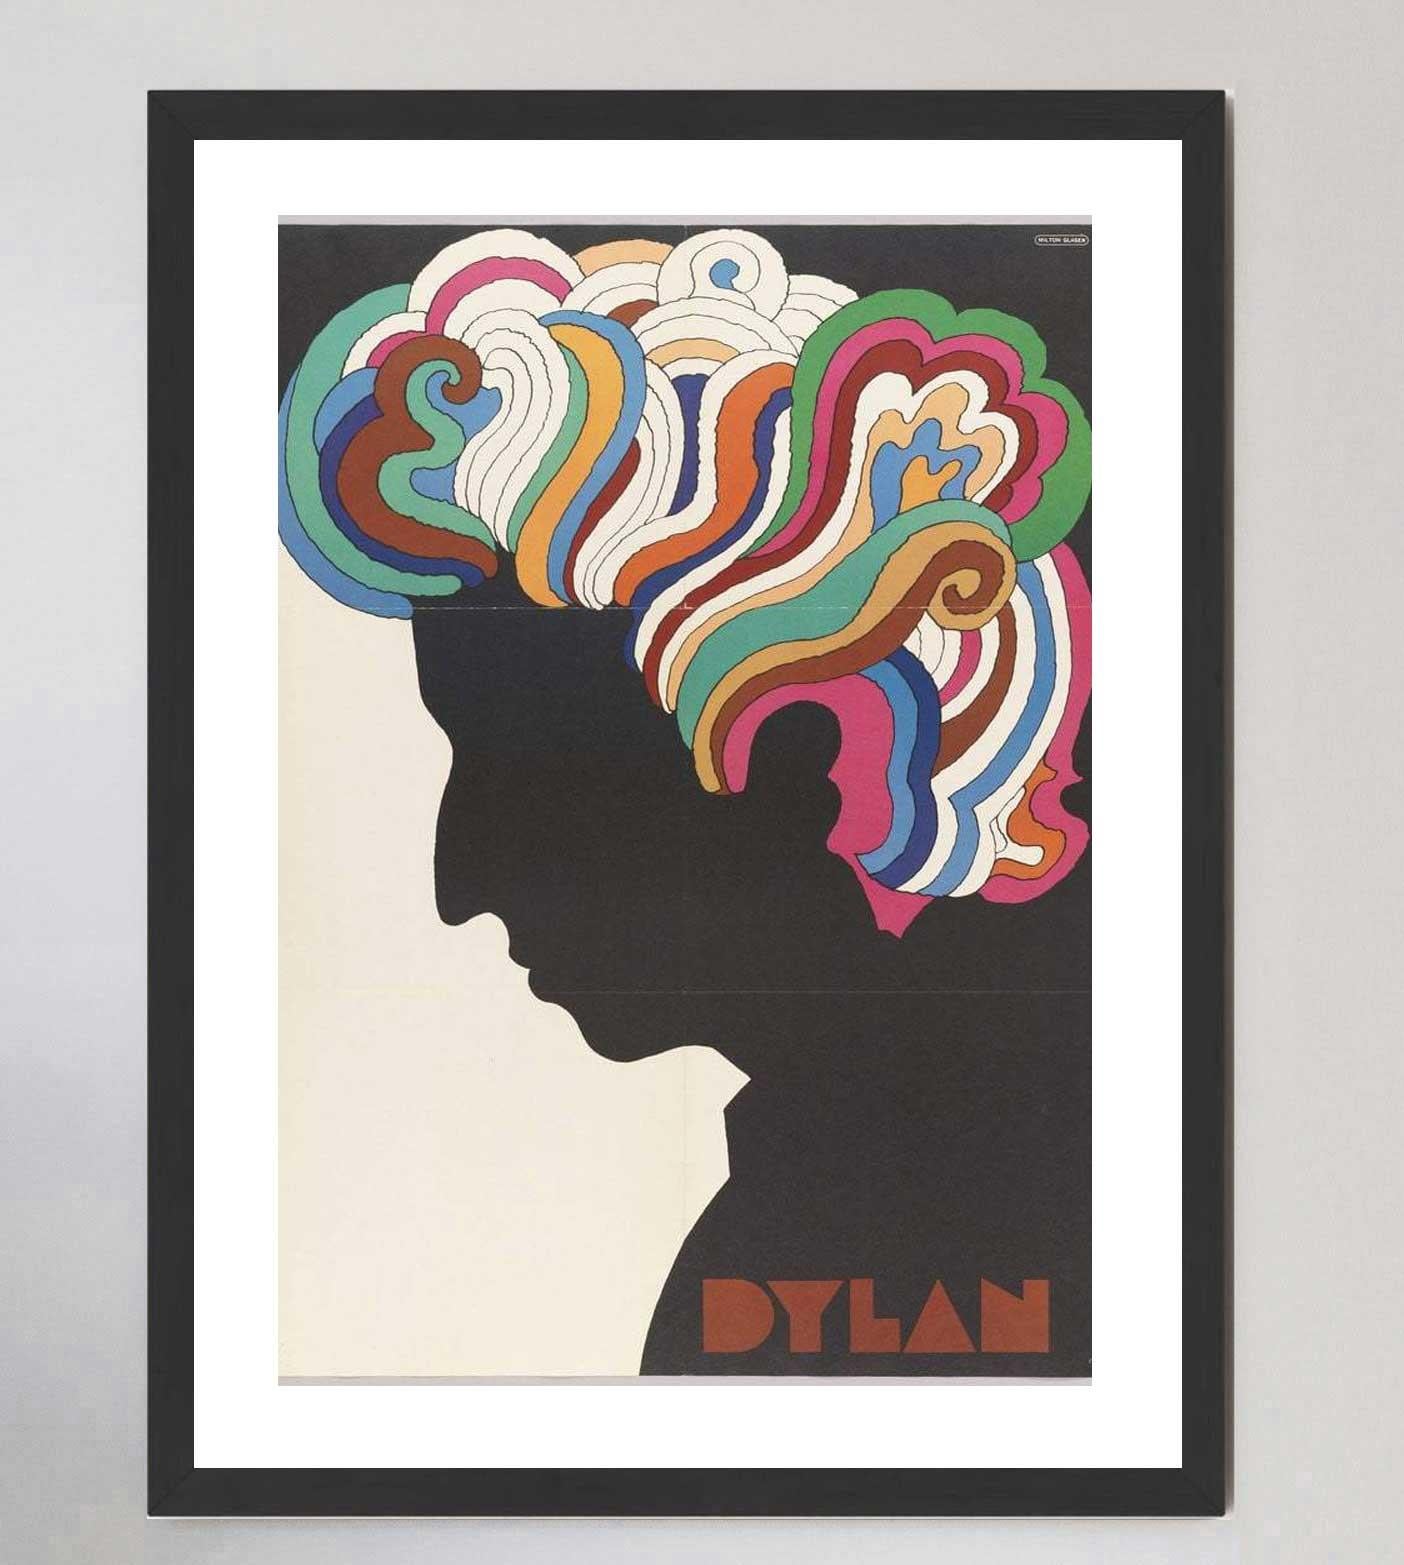 Celebrated graphic designer Milton Glaser was commissioned to create this special poster to package with Bob Dylan's Greatest Hits album in 1966. With Dylan suffering serious injuries as a result of a motorcycle accident, this artwork collaboration